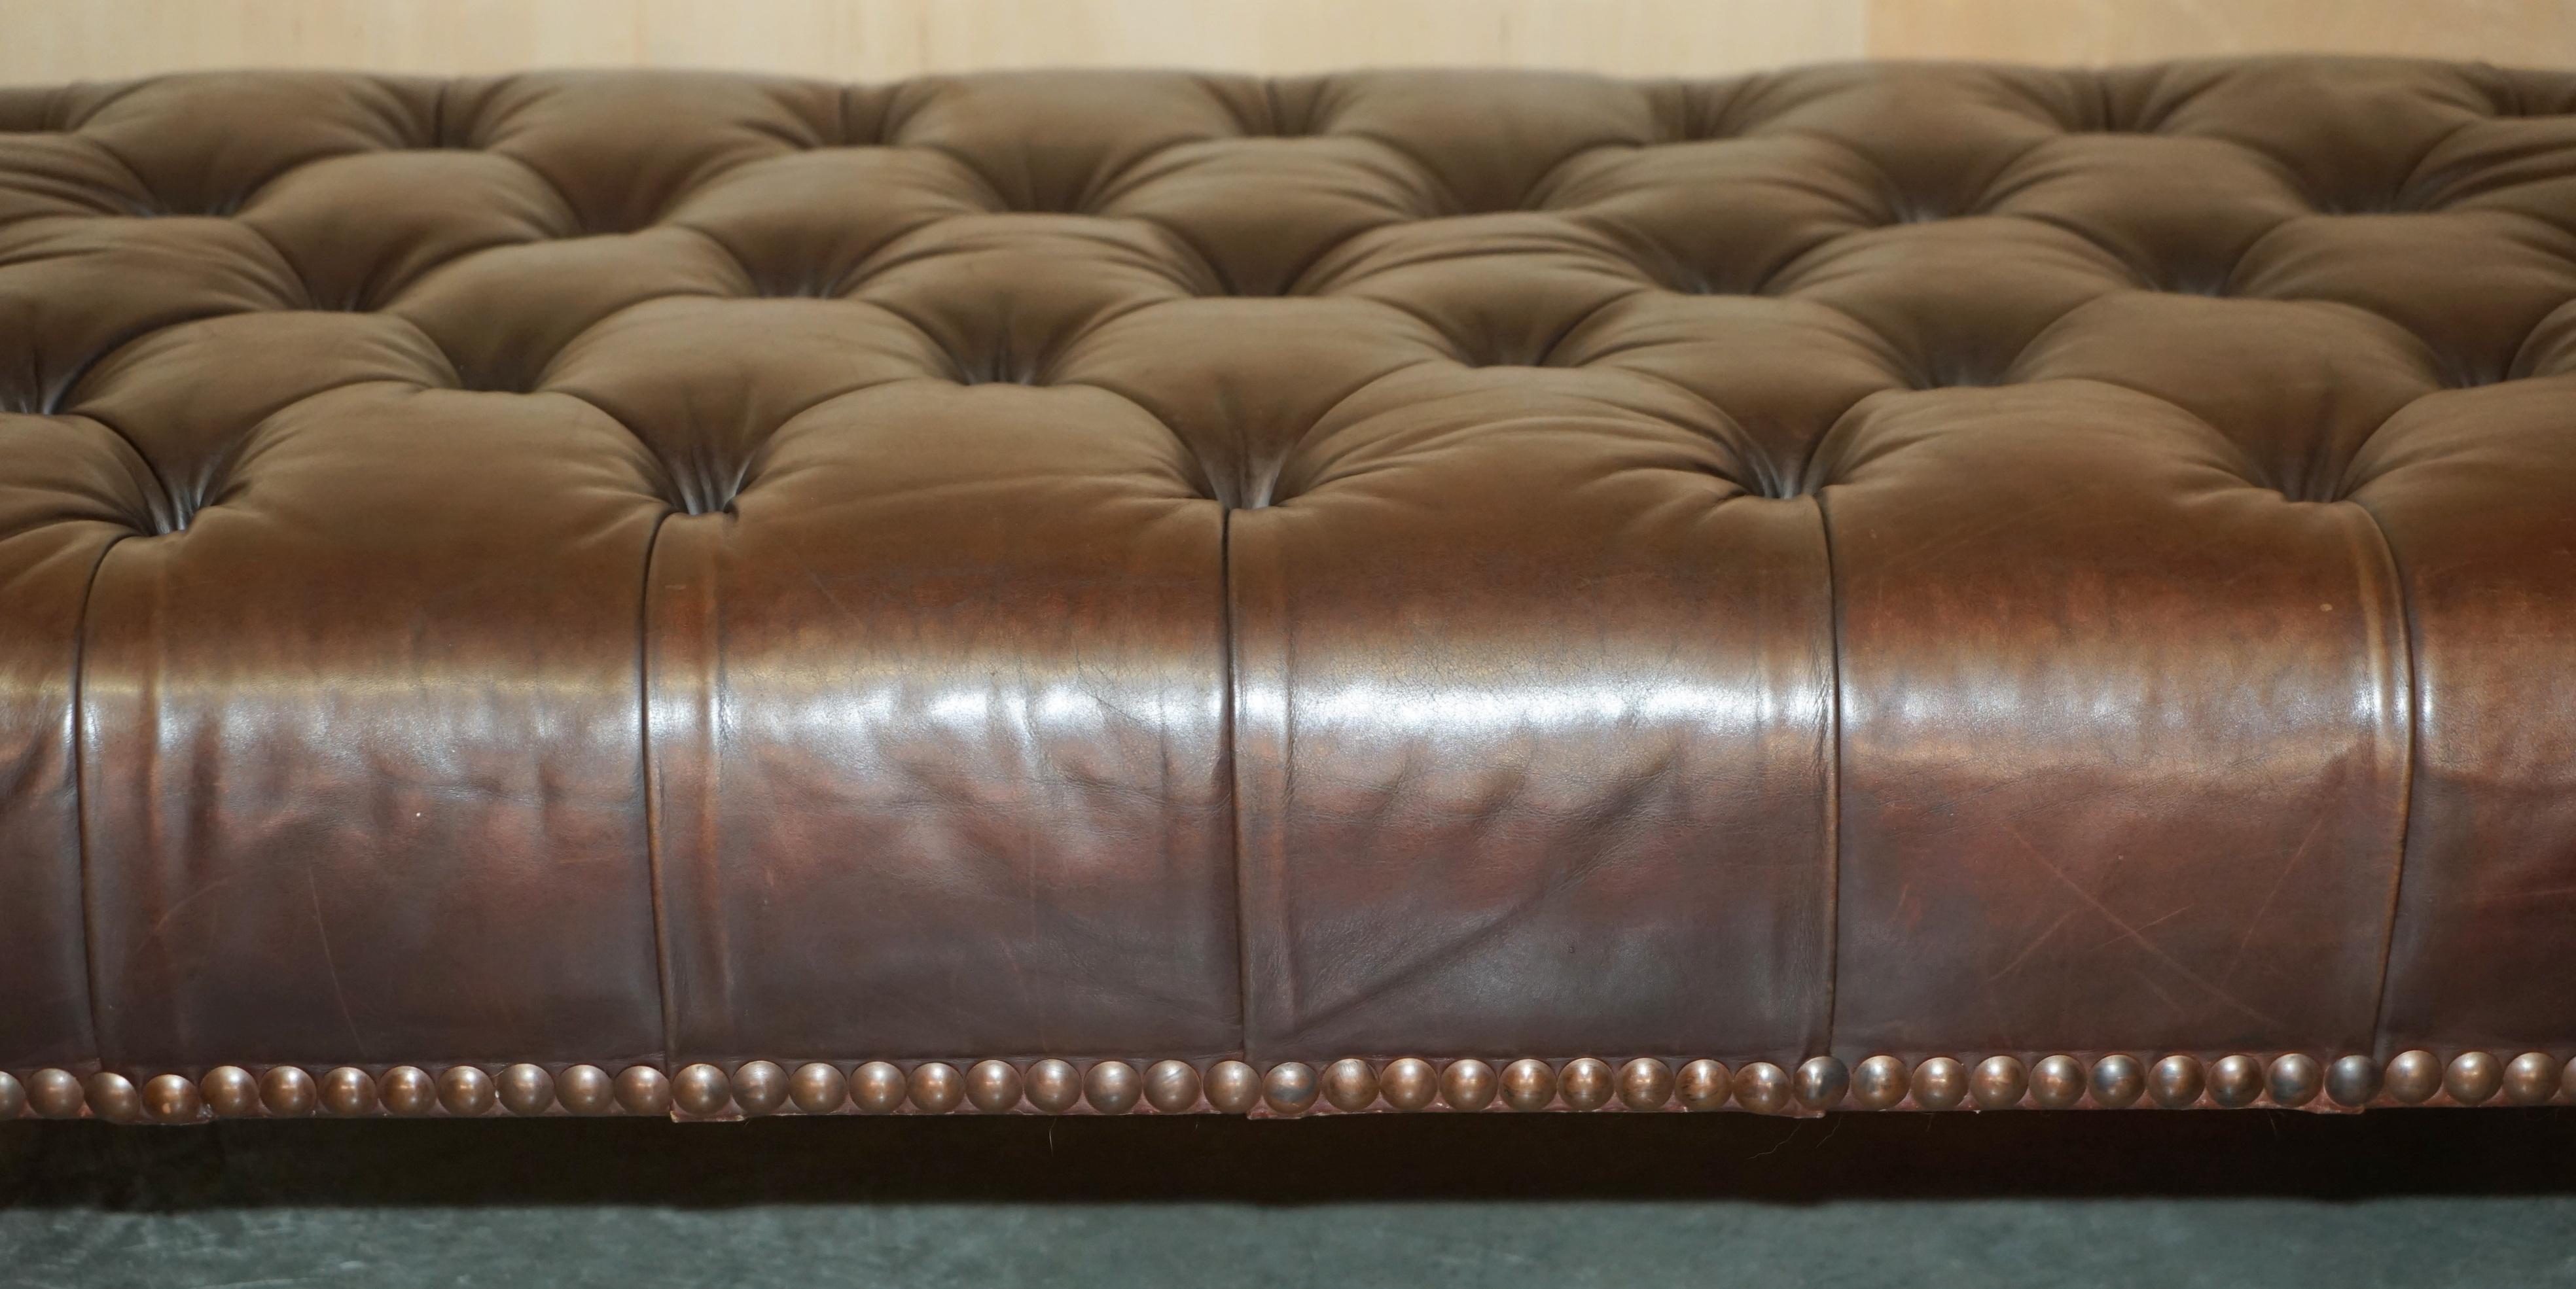 STUNNiNG HAND DYED BROWN LEATHER GEORGE SMITH CHESTERFIELD TUFTED FOOTSTOOL 3